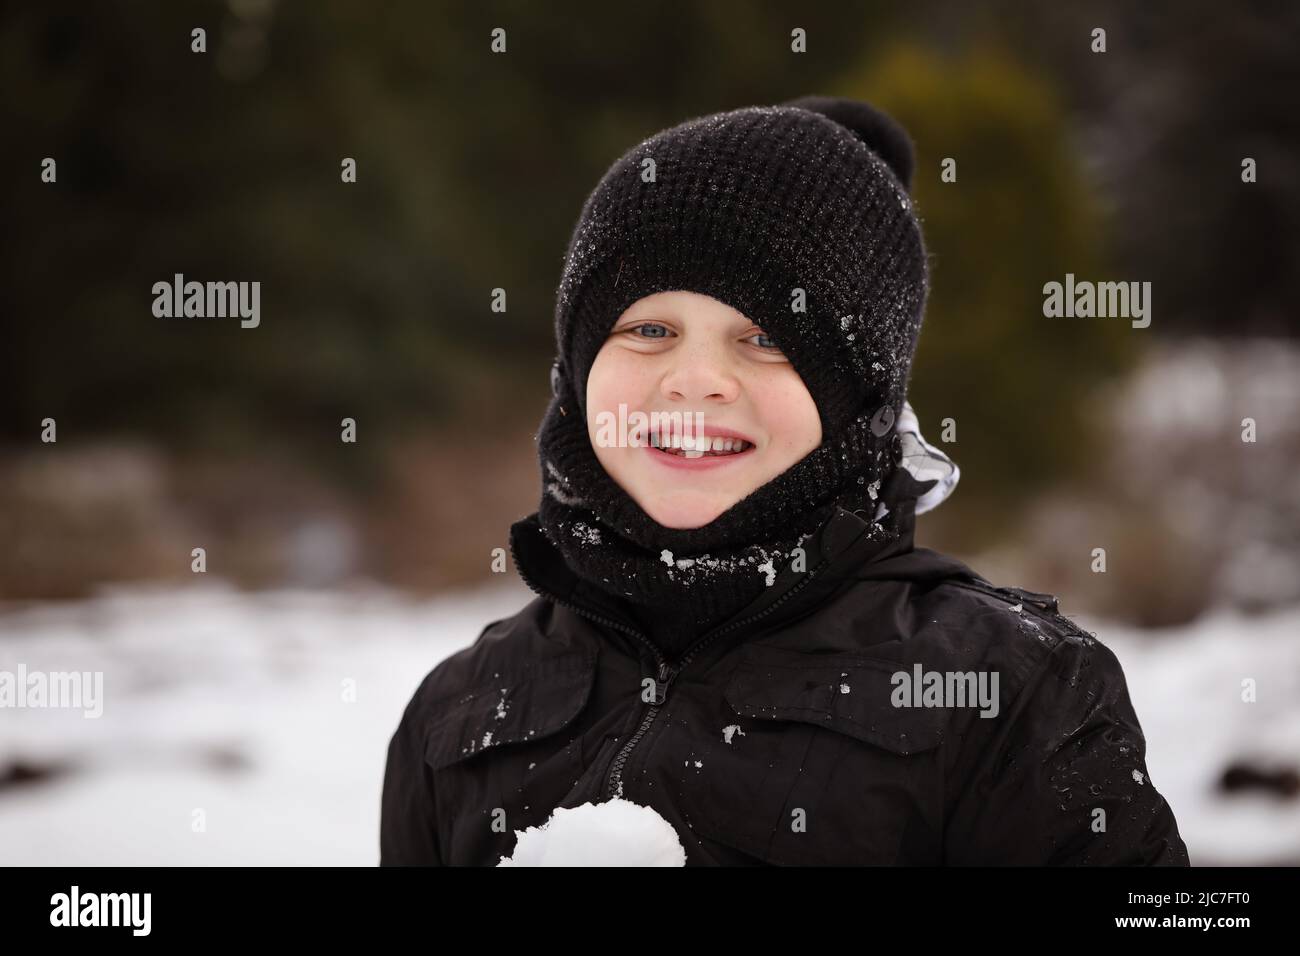 Boy in the snow with snow ball having snowball fight Stock Photo